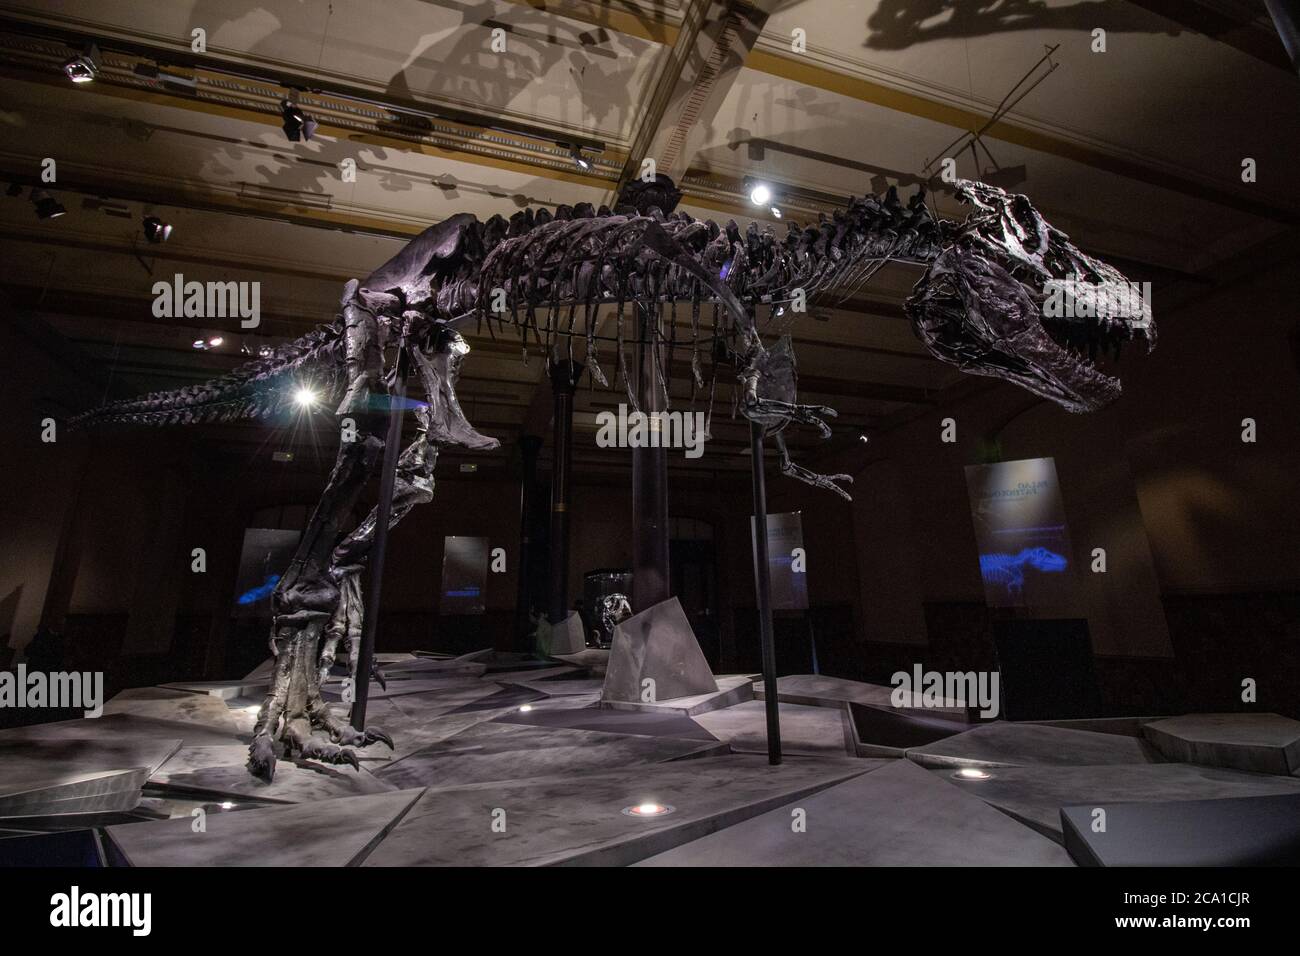 Giant skeletons of Tyrannosaurus rex in Dinosaur Hall. The Natural History museum, established in 1810, houses millions paleontological specimens. Stock Photo